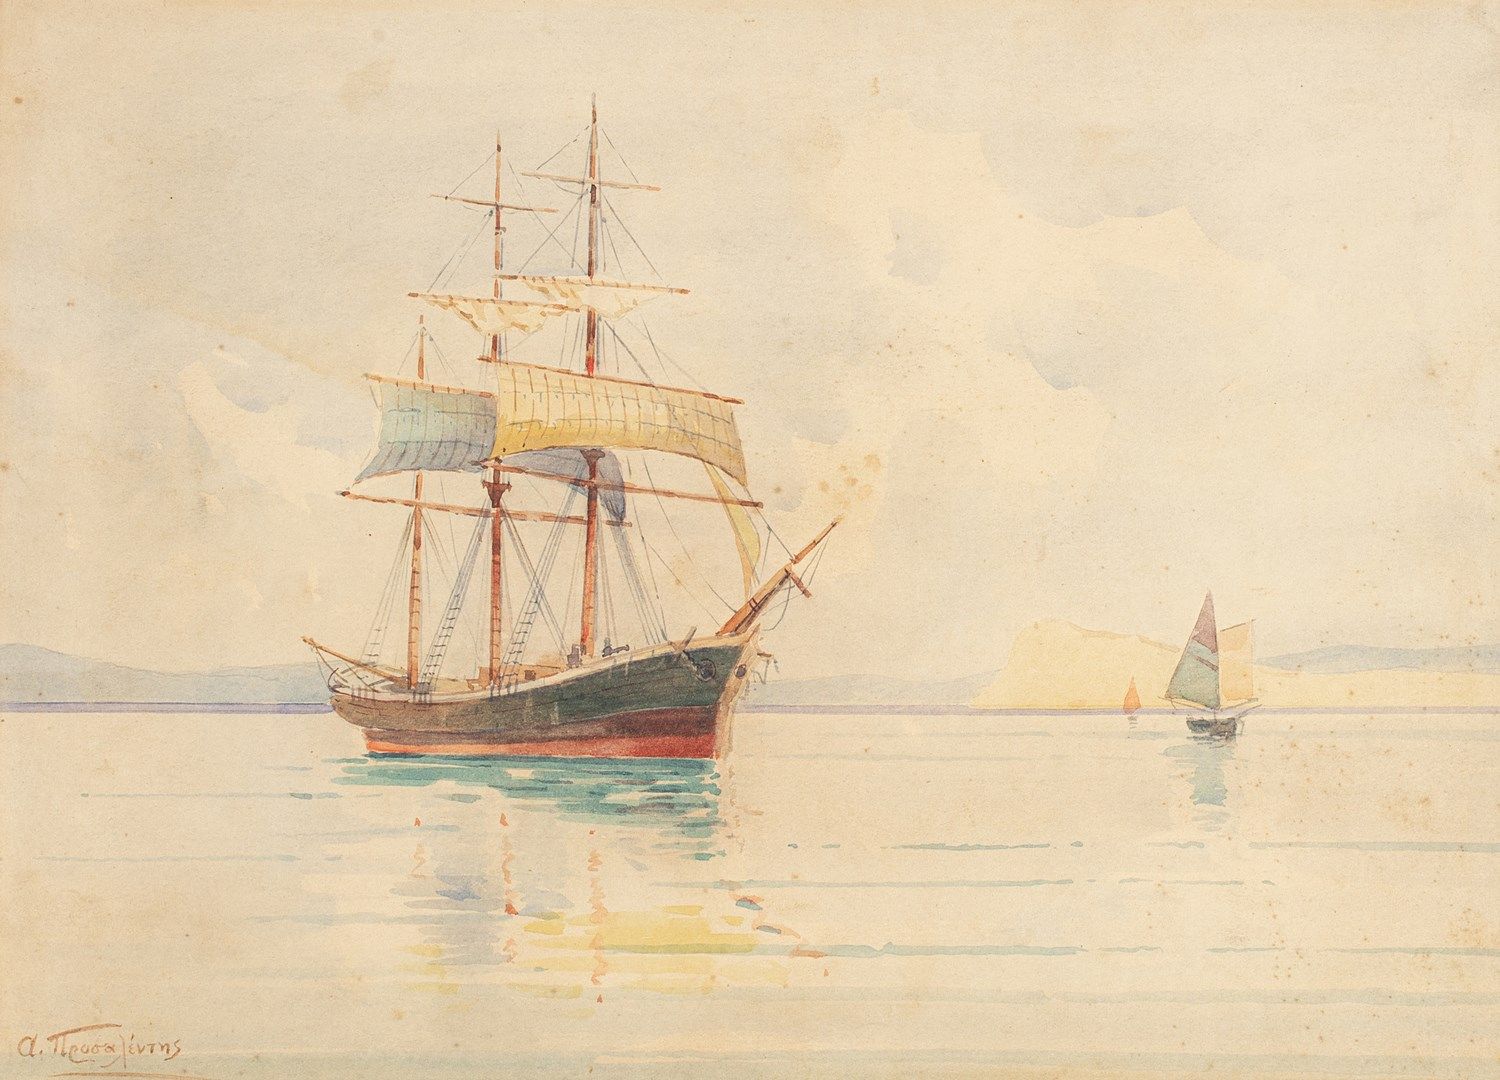 Null PROSALENTIS Emilios, 1859-1926

Three-masted ship at anchor

watercolour (s&hellip;